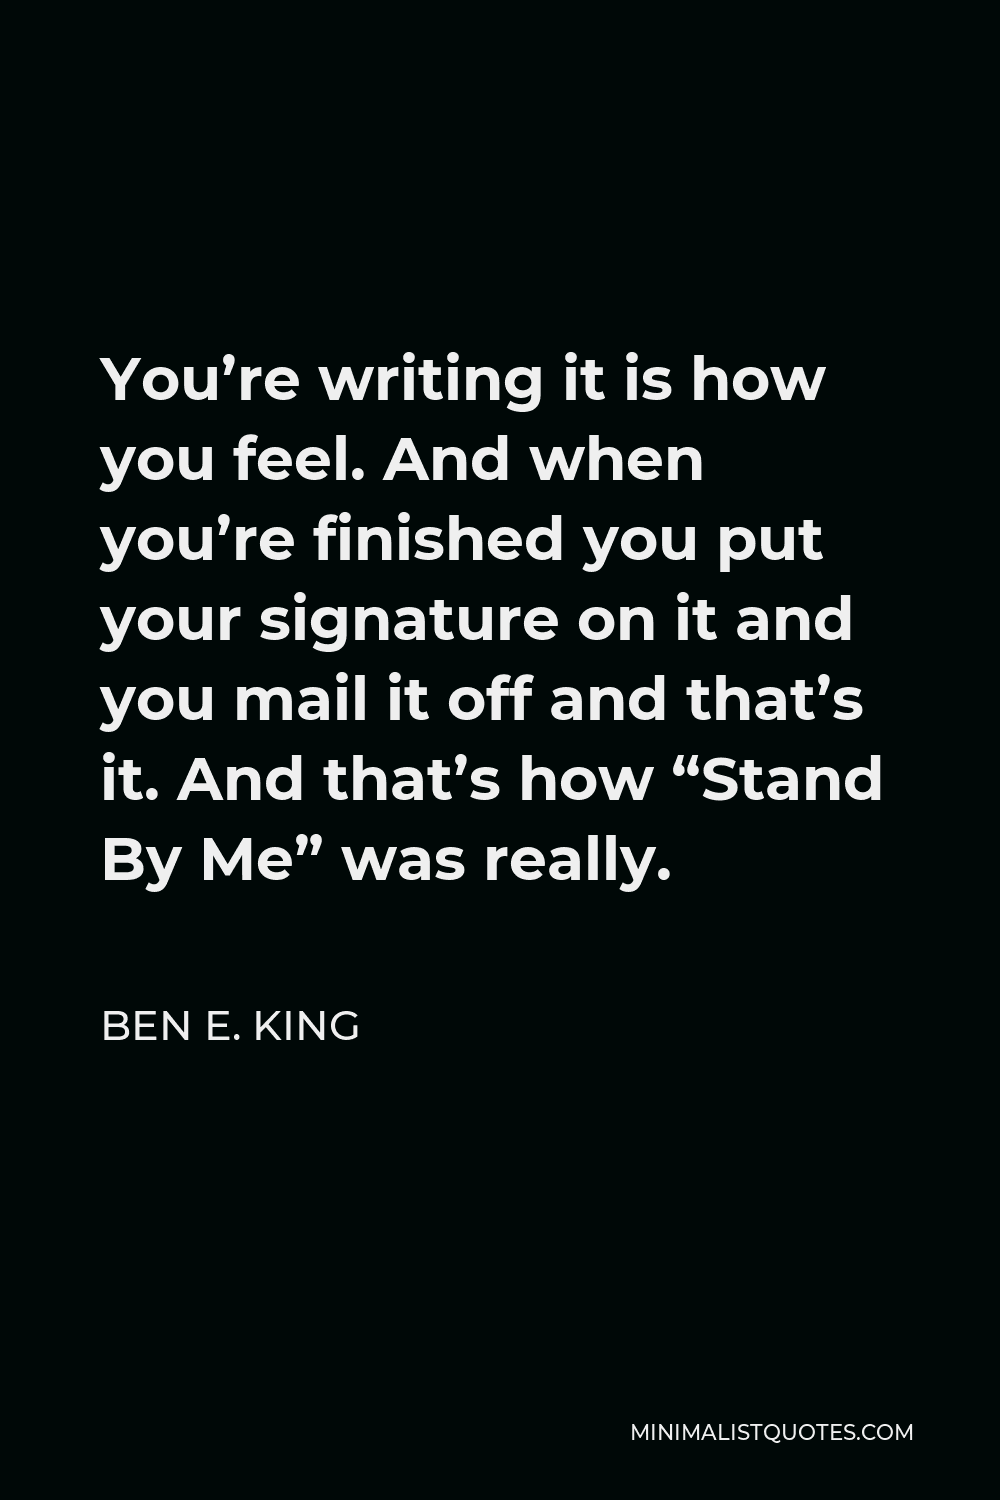 Ben E. King Quote - You’re writing it is how you feel. And when you’re finished you put your signature on it and you mail it off and that’s it. And that’s how “Stand By Me” was really.